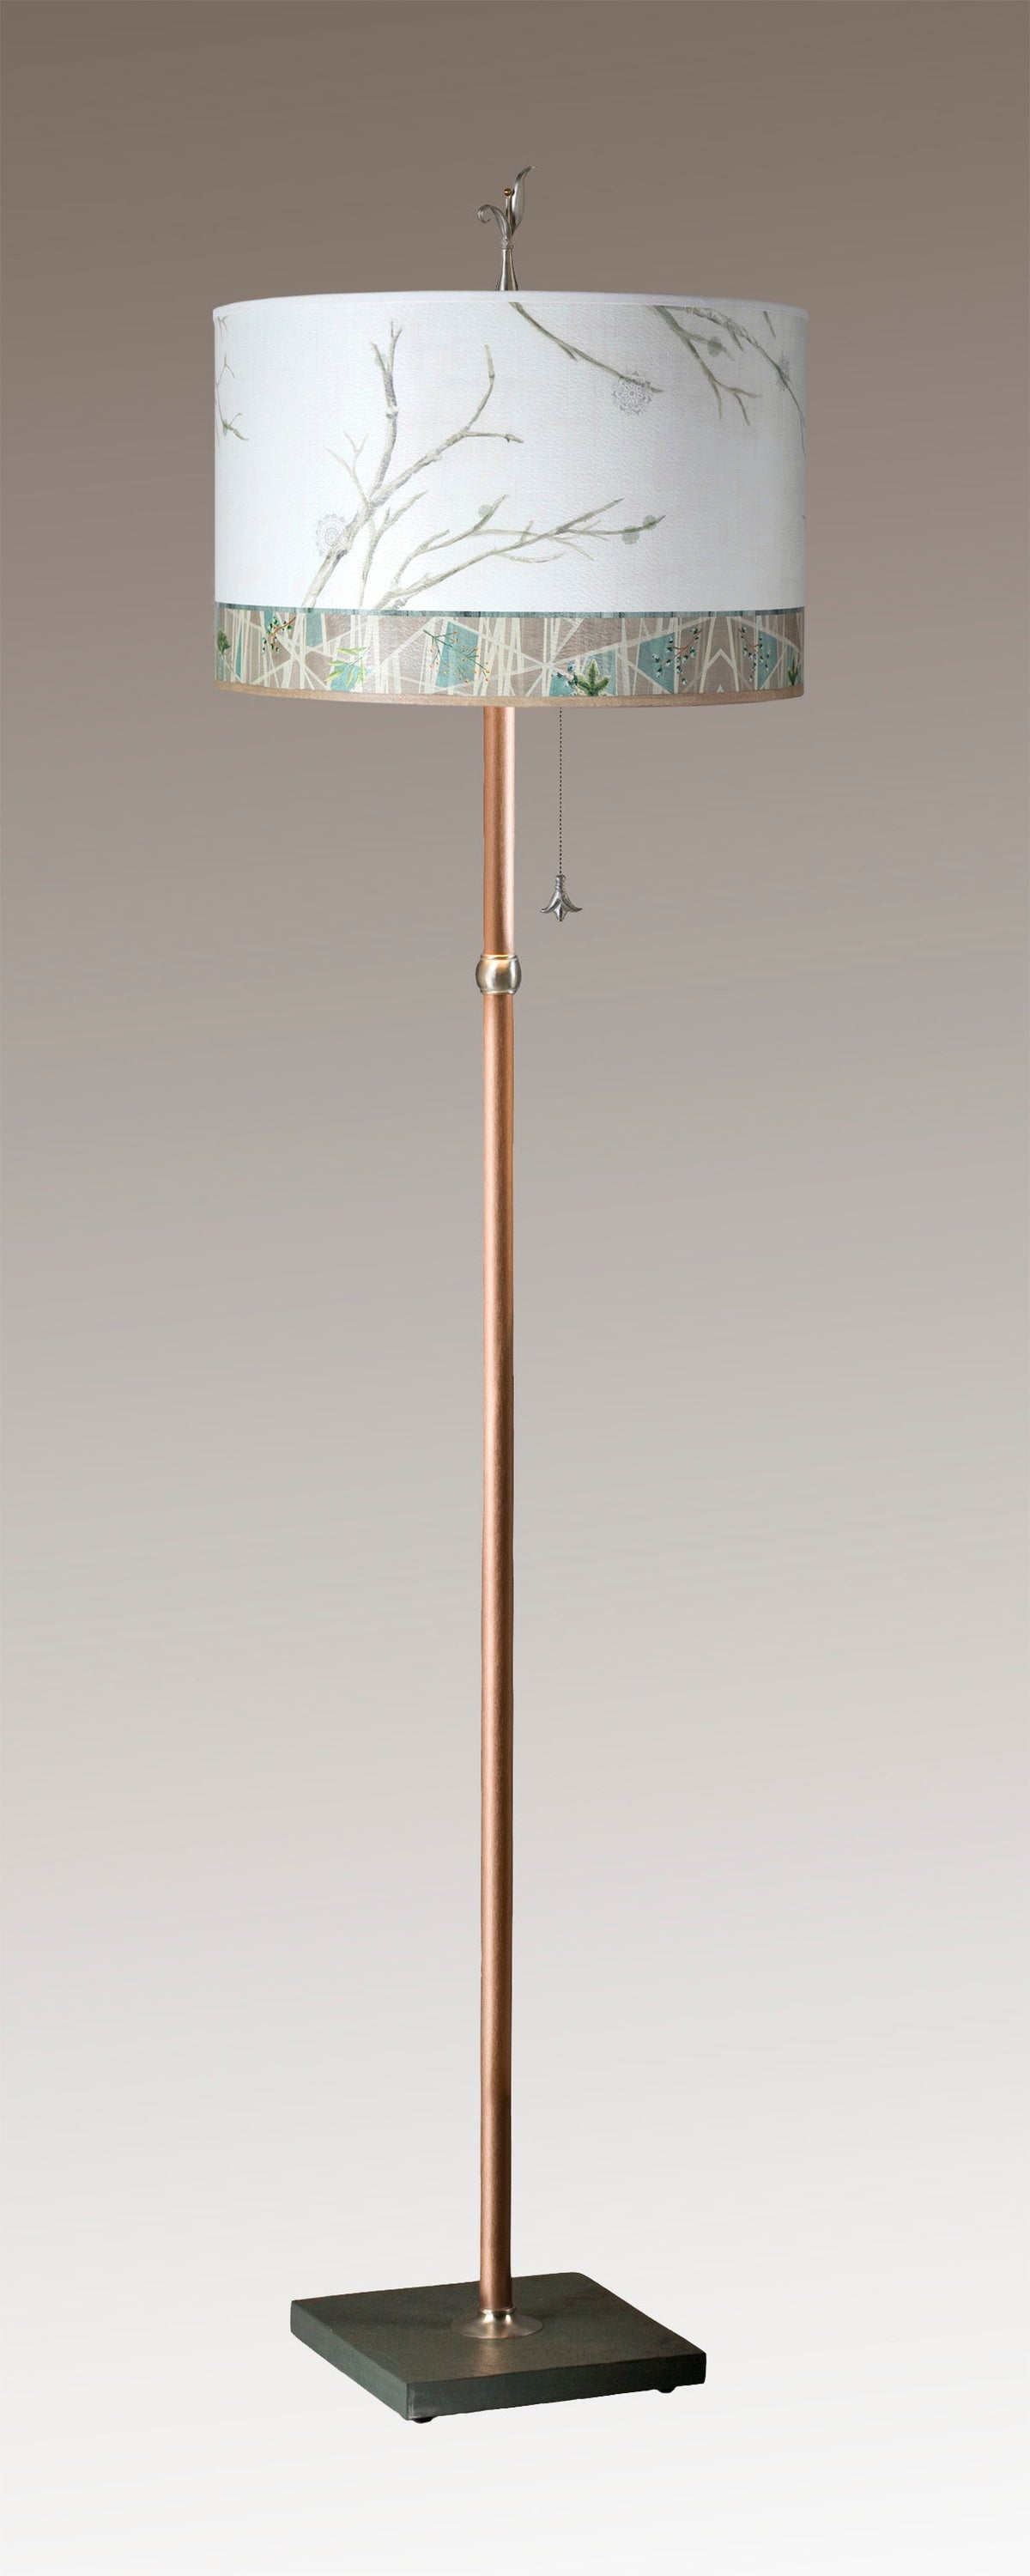 Janna Ugone &amp; Co Floor Lamps Copper Floor Lamp with Large Drum Lampshade in Prism Branch